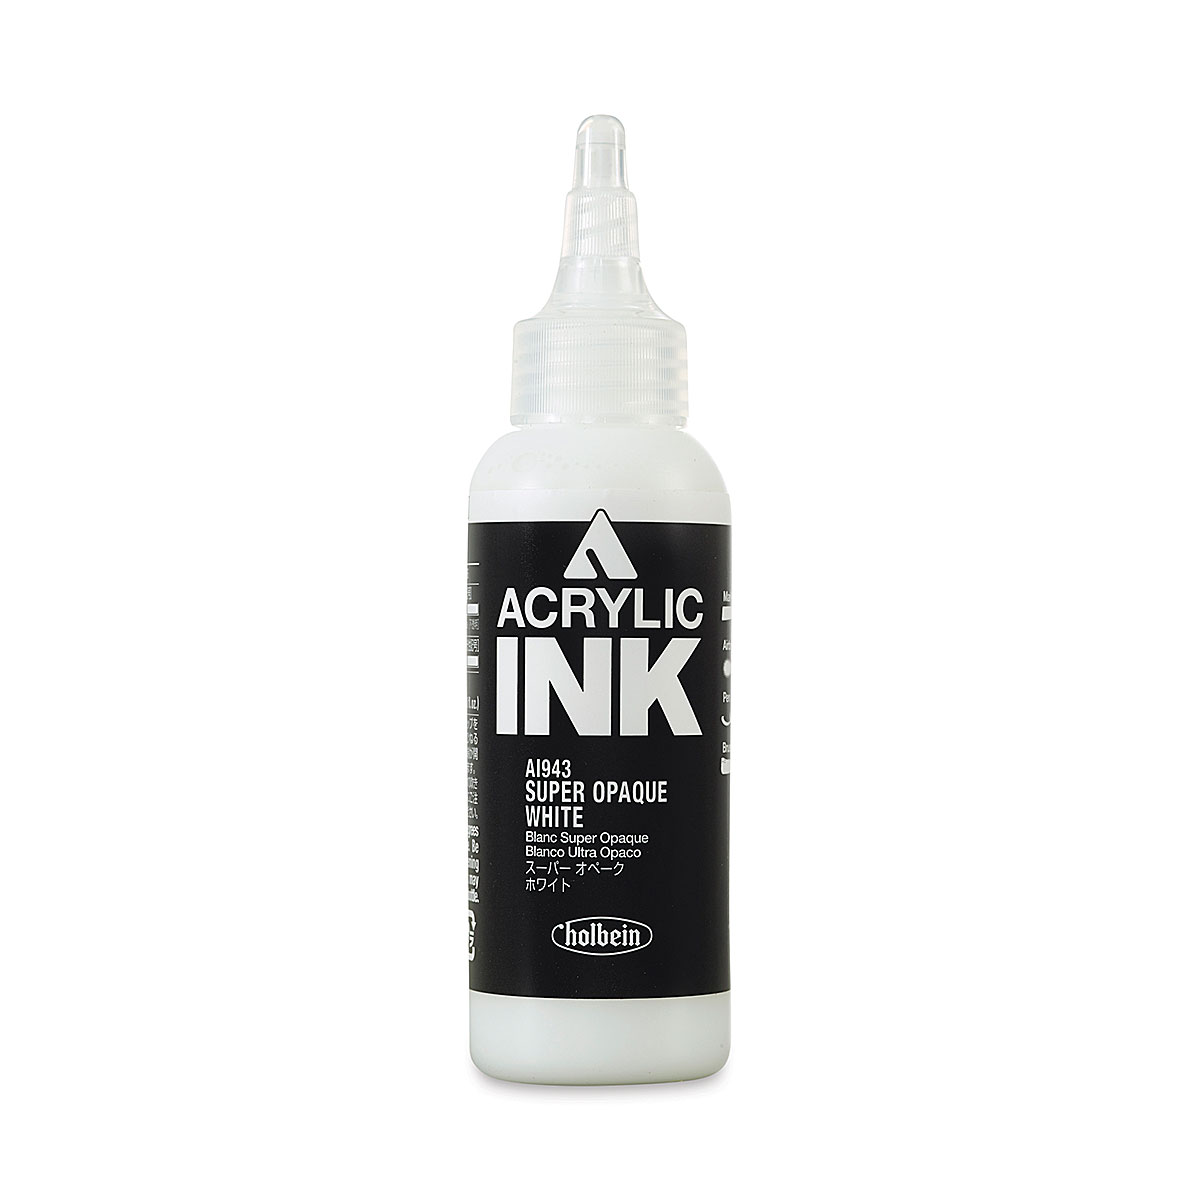 Holbein Acrylic Ink - Super Opaque White, 100 ml